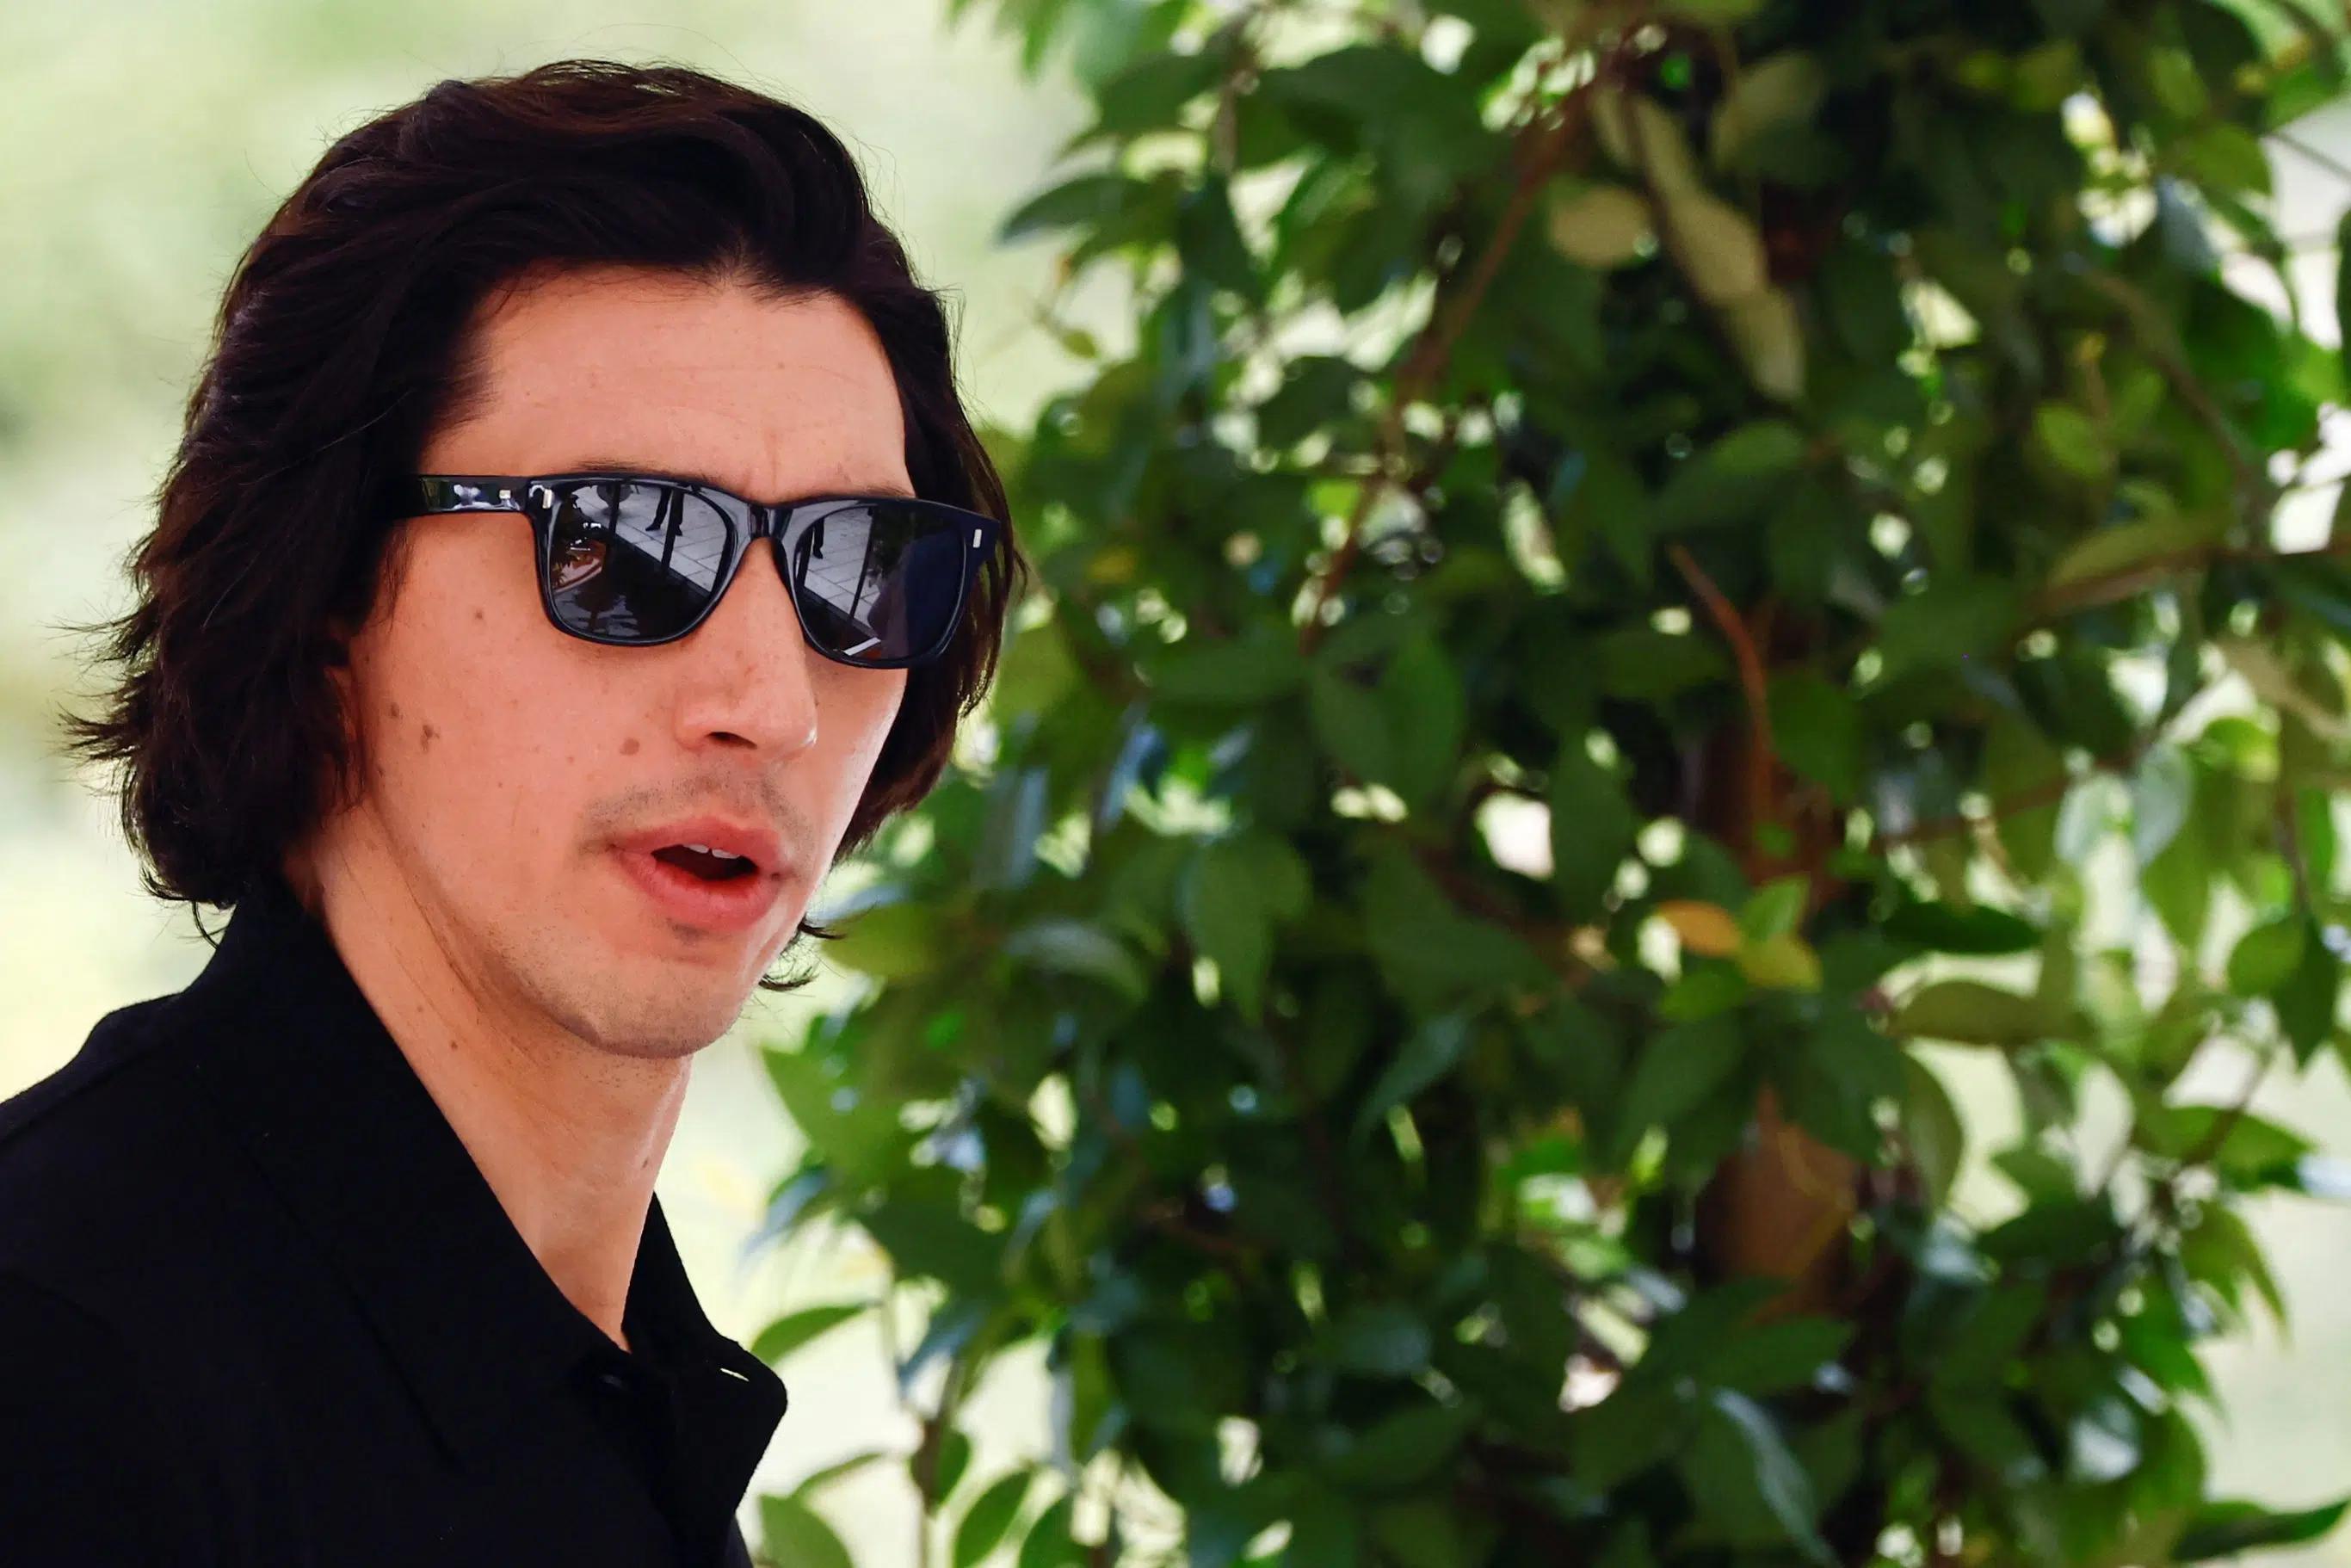 Adam Driver - Variety500 - Top 500 Entertainment Business Leaders